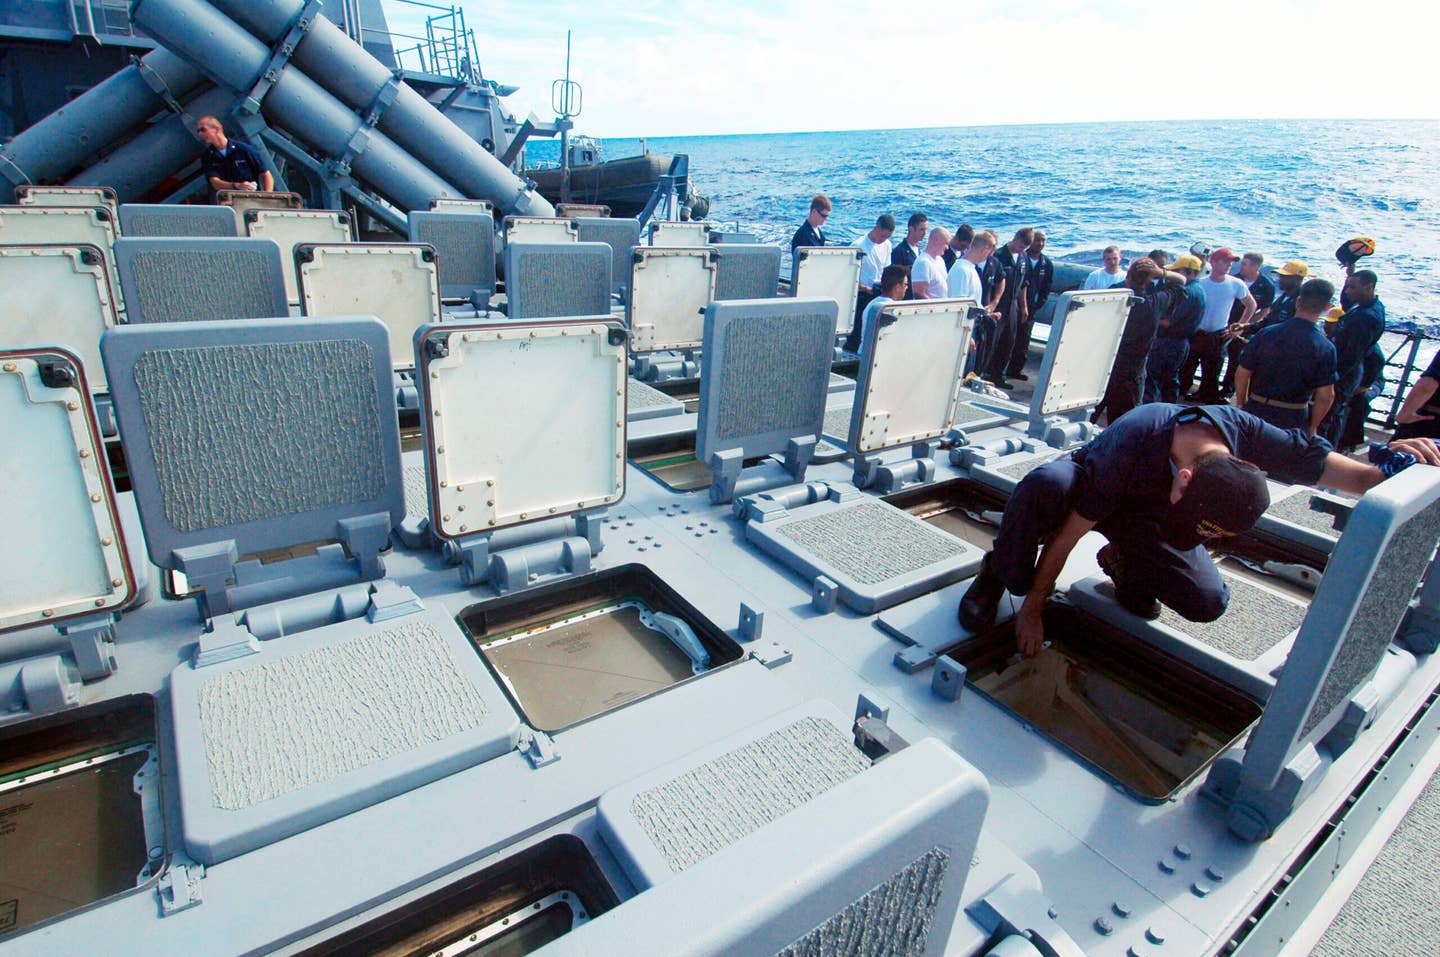 A Sailor aboard the guided-missile destroyer USS <em>Fitzgerald</em> (DDG-62) inspects the MK 41 Vertical Launching System (VLS) for water to prevent electrical failure. The MK 41 Vertical Launching System (VLS) is a canister launching system, which provides a rapid-fire launch capability against hostile threats. (U.S. Navy photo by Photographer's Mate Airman Adam York)